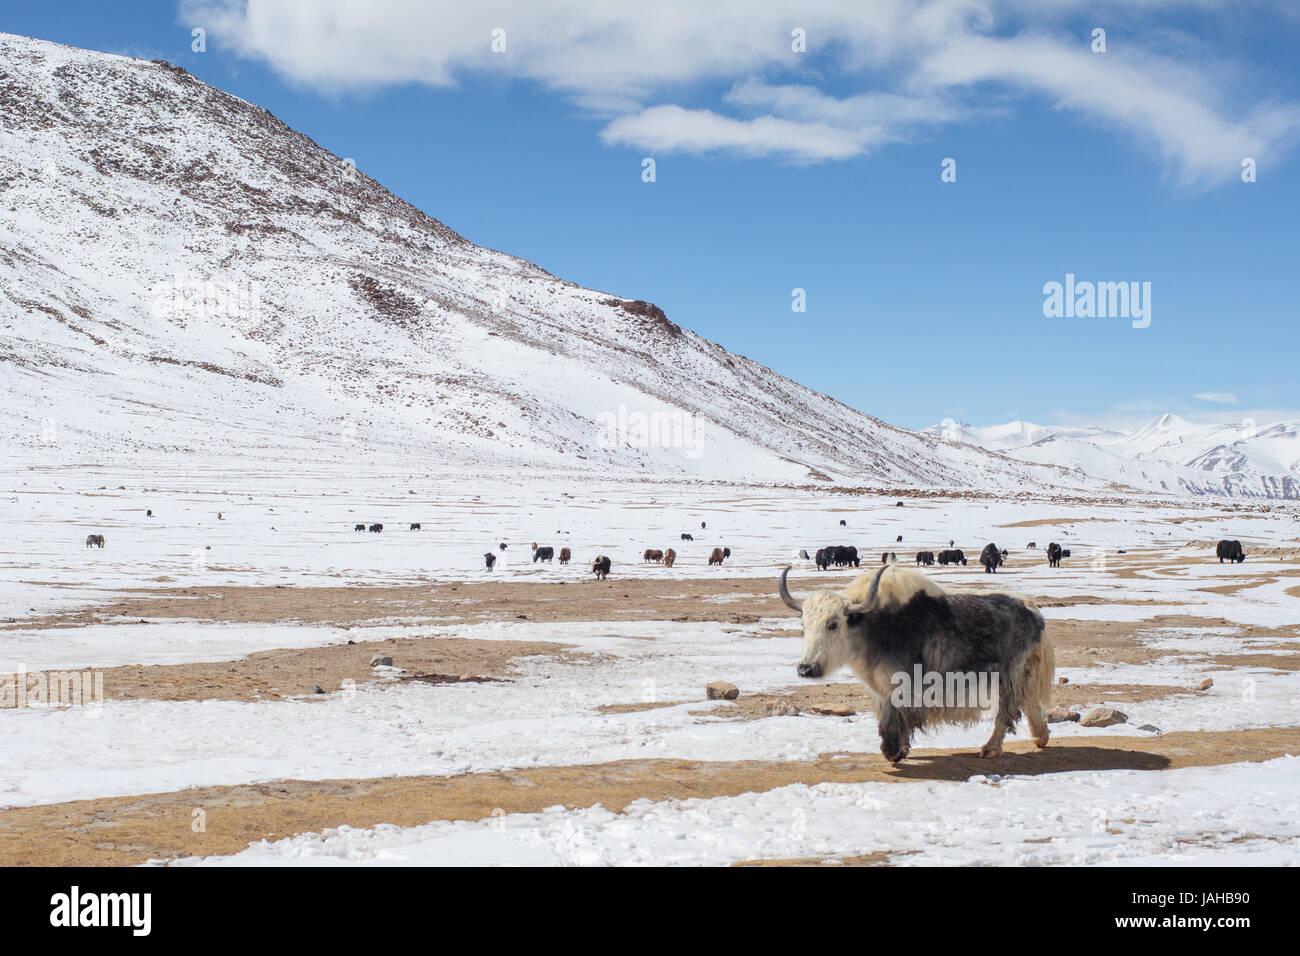 A huge herd of Yaks grazing on the Pologongka pass in the Changthang region of Ladakh. The foreground is dominated by a single male Yak with white and Stock Photo